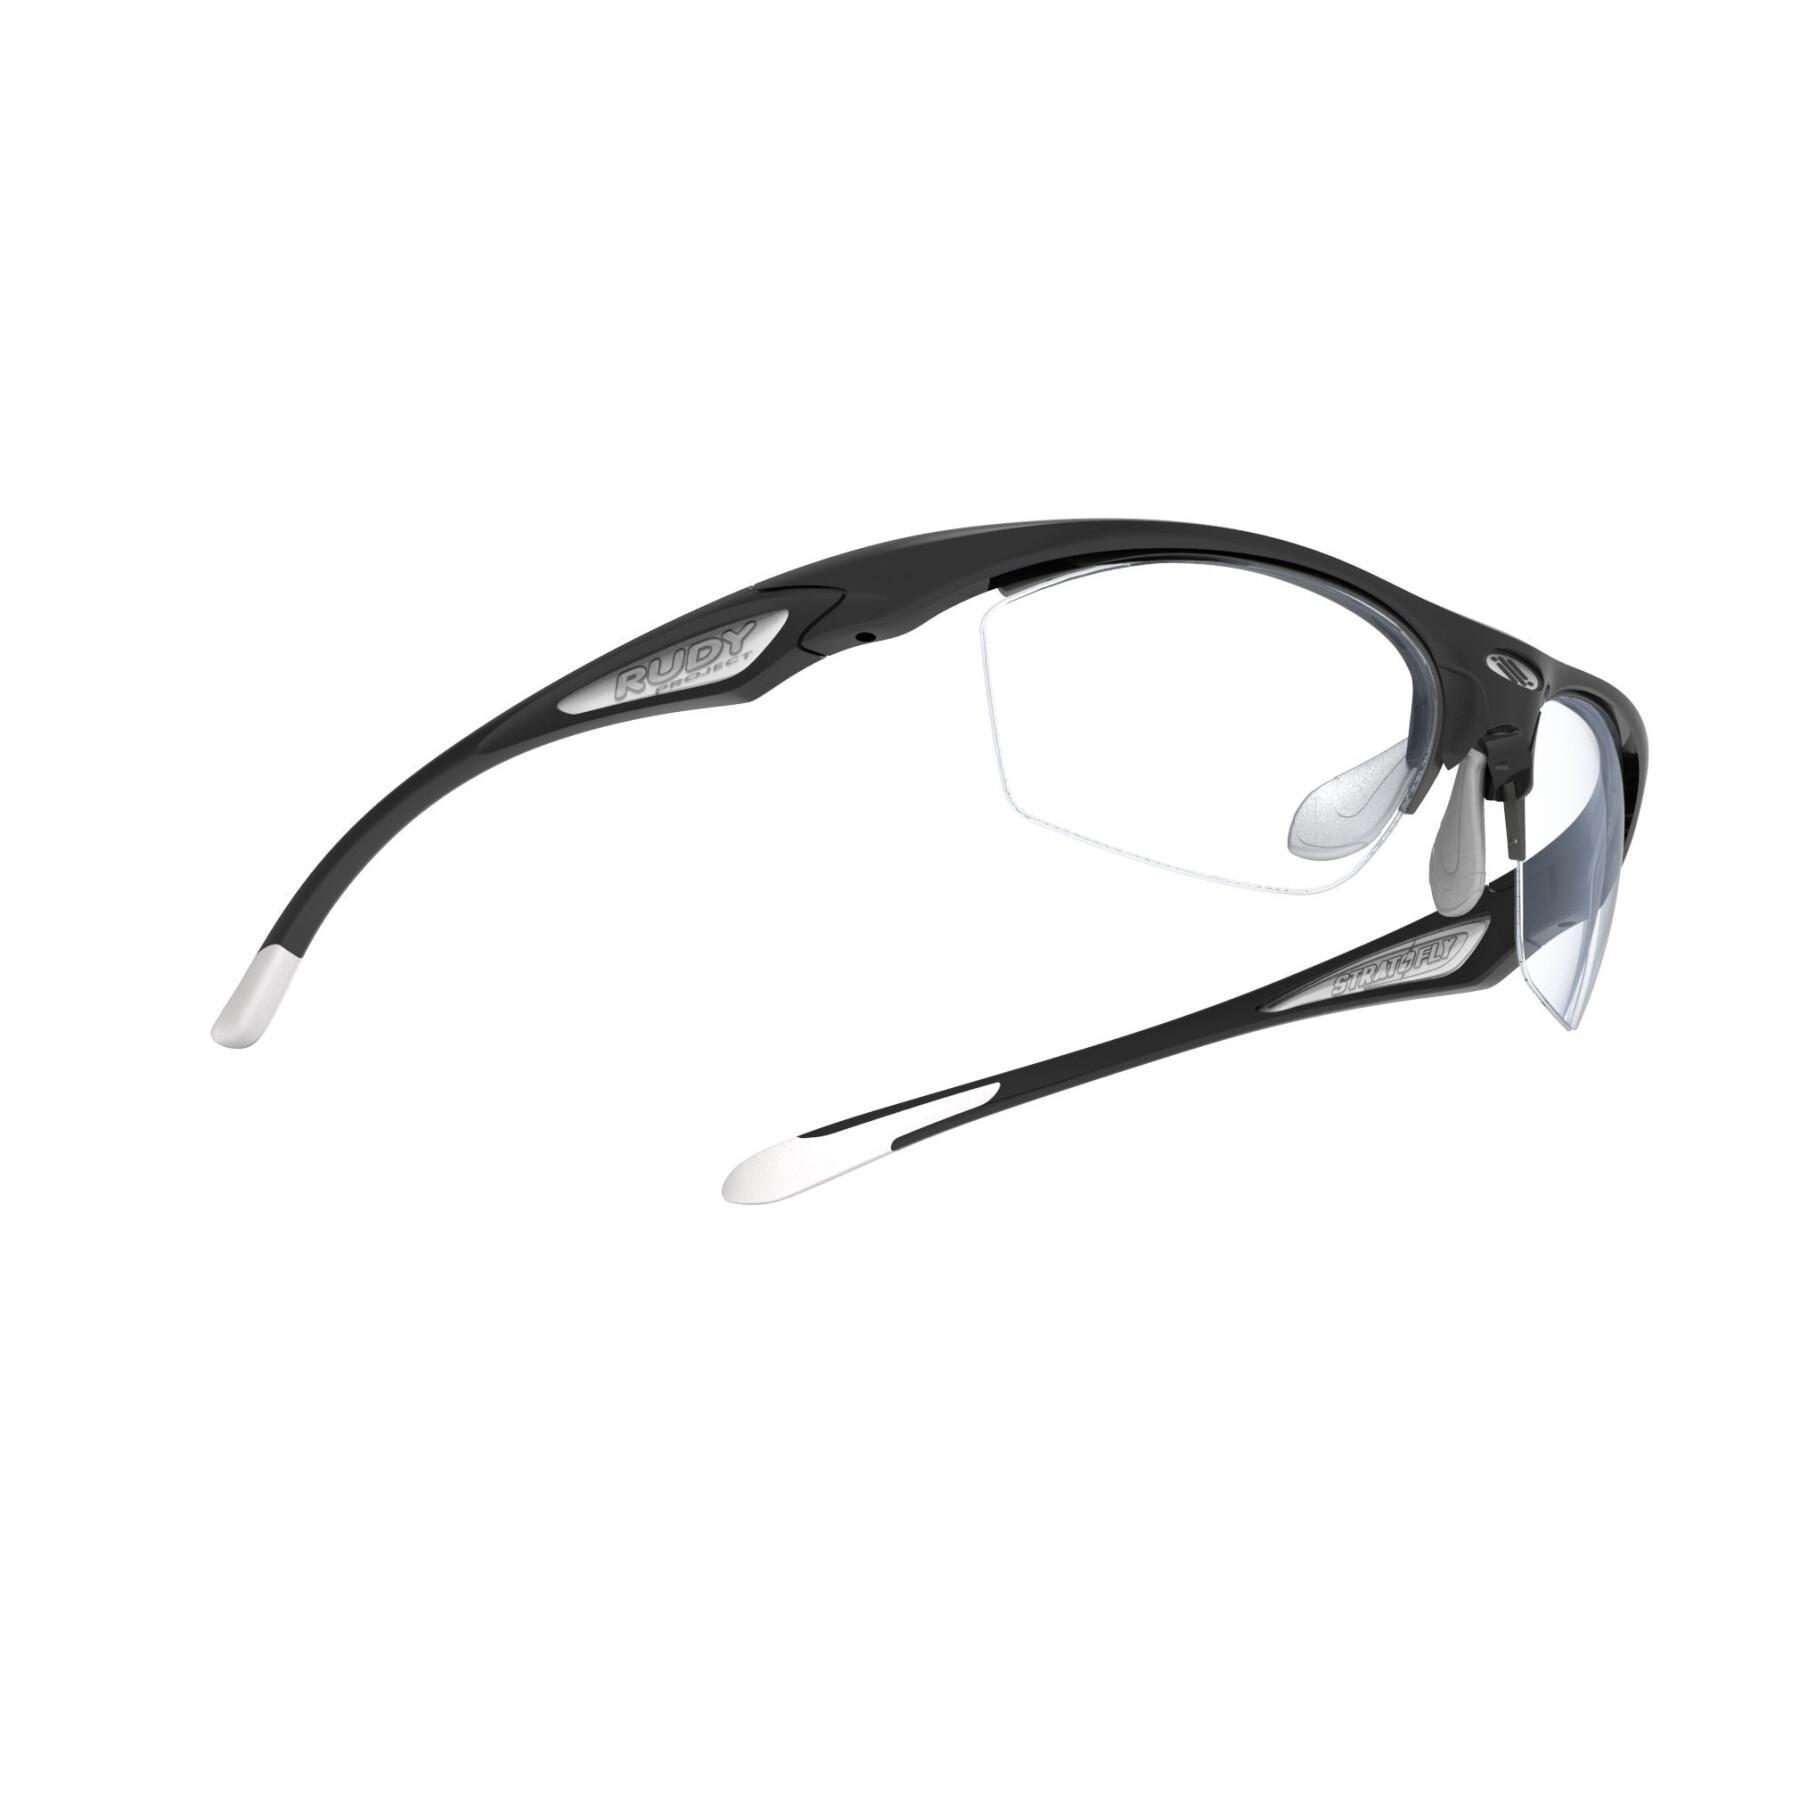 Performance glasses Rudy Project stratofly rx solution